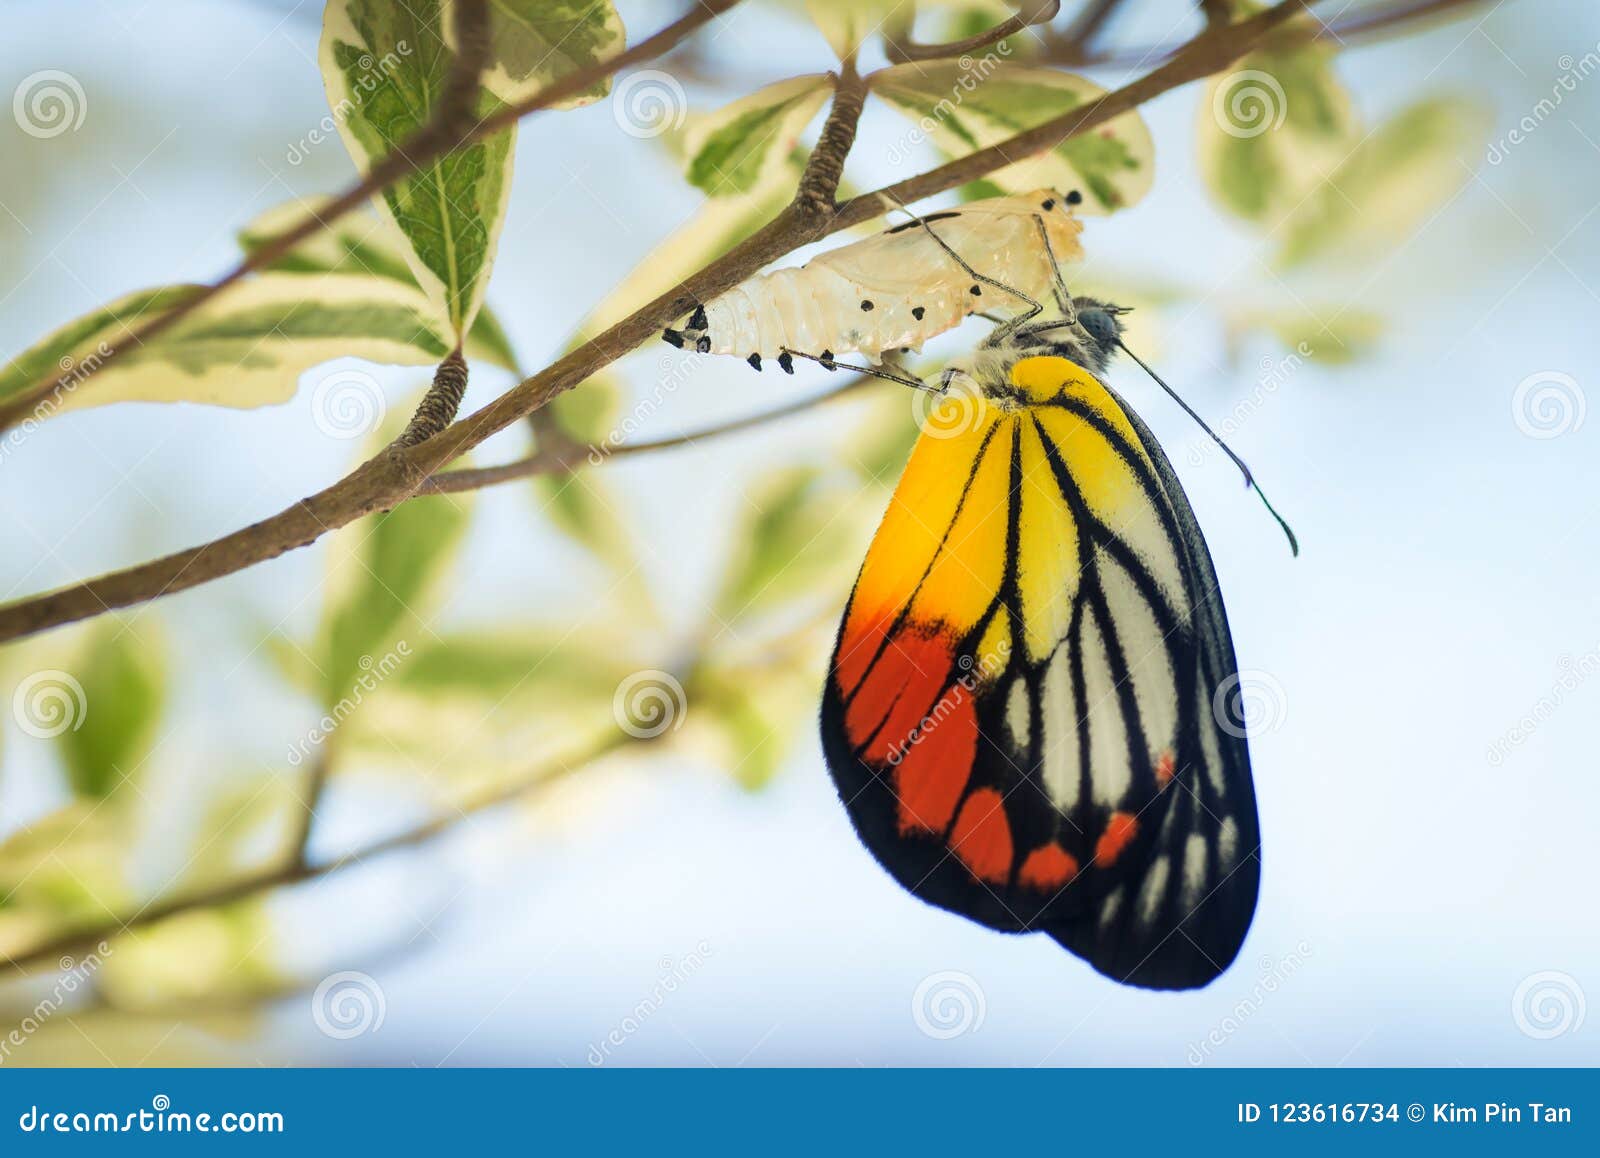 Beautiful Butterfly Emerged from Its Cocoon Stock Photo - Image of ...